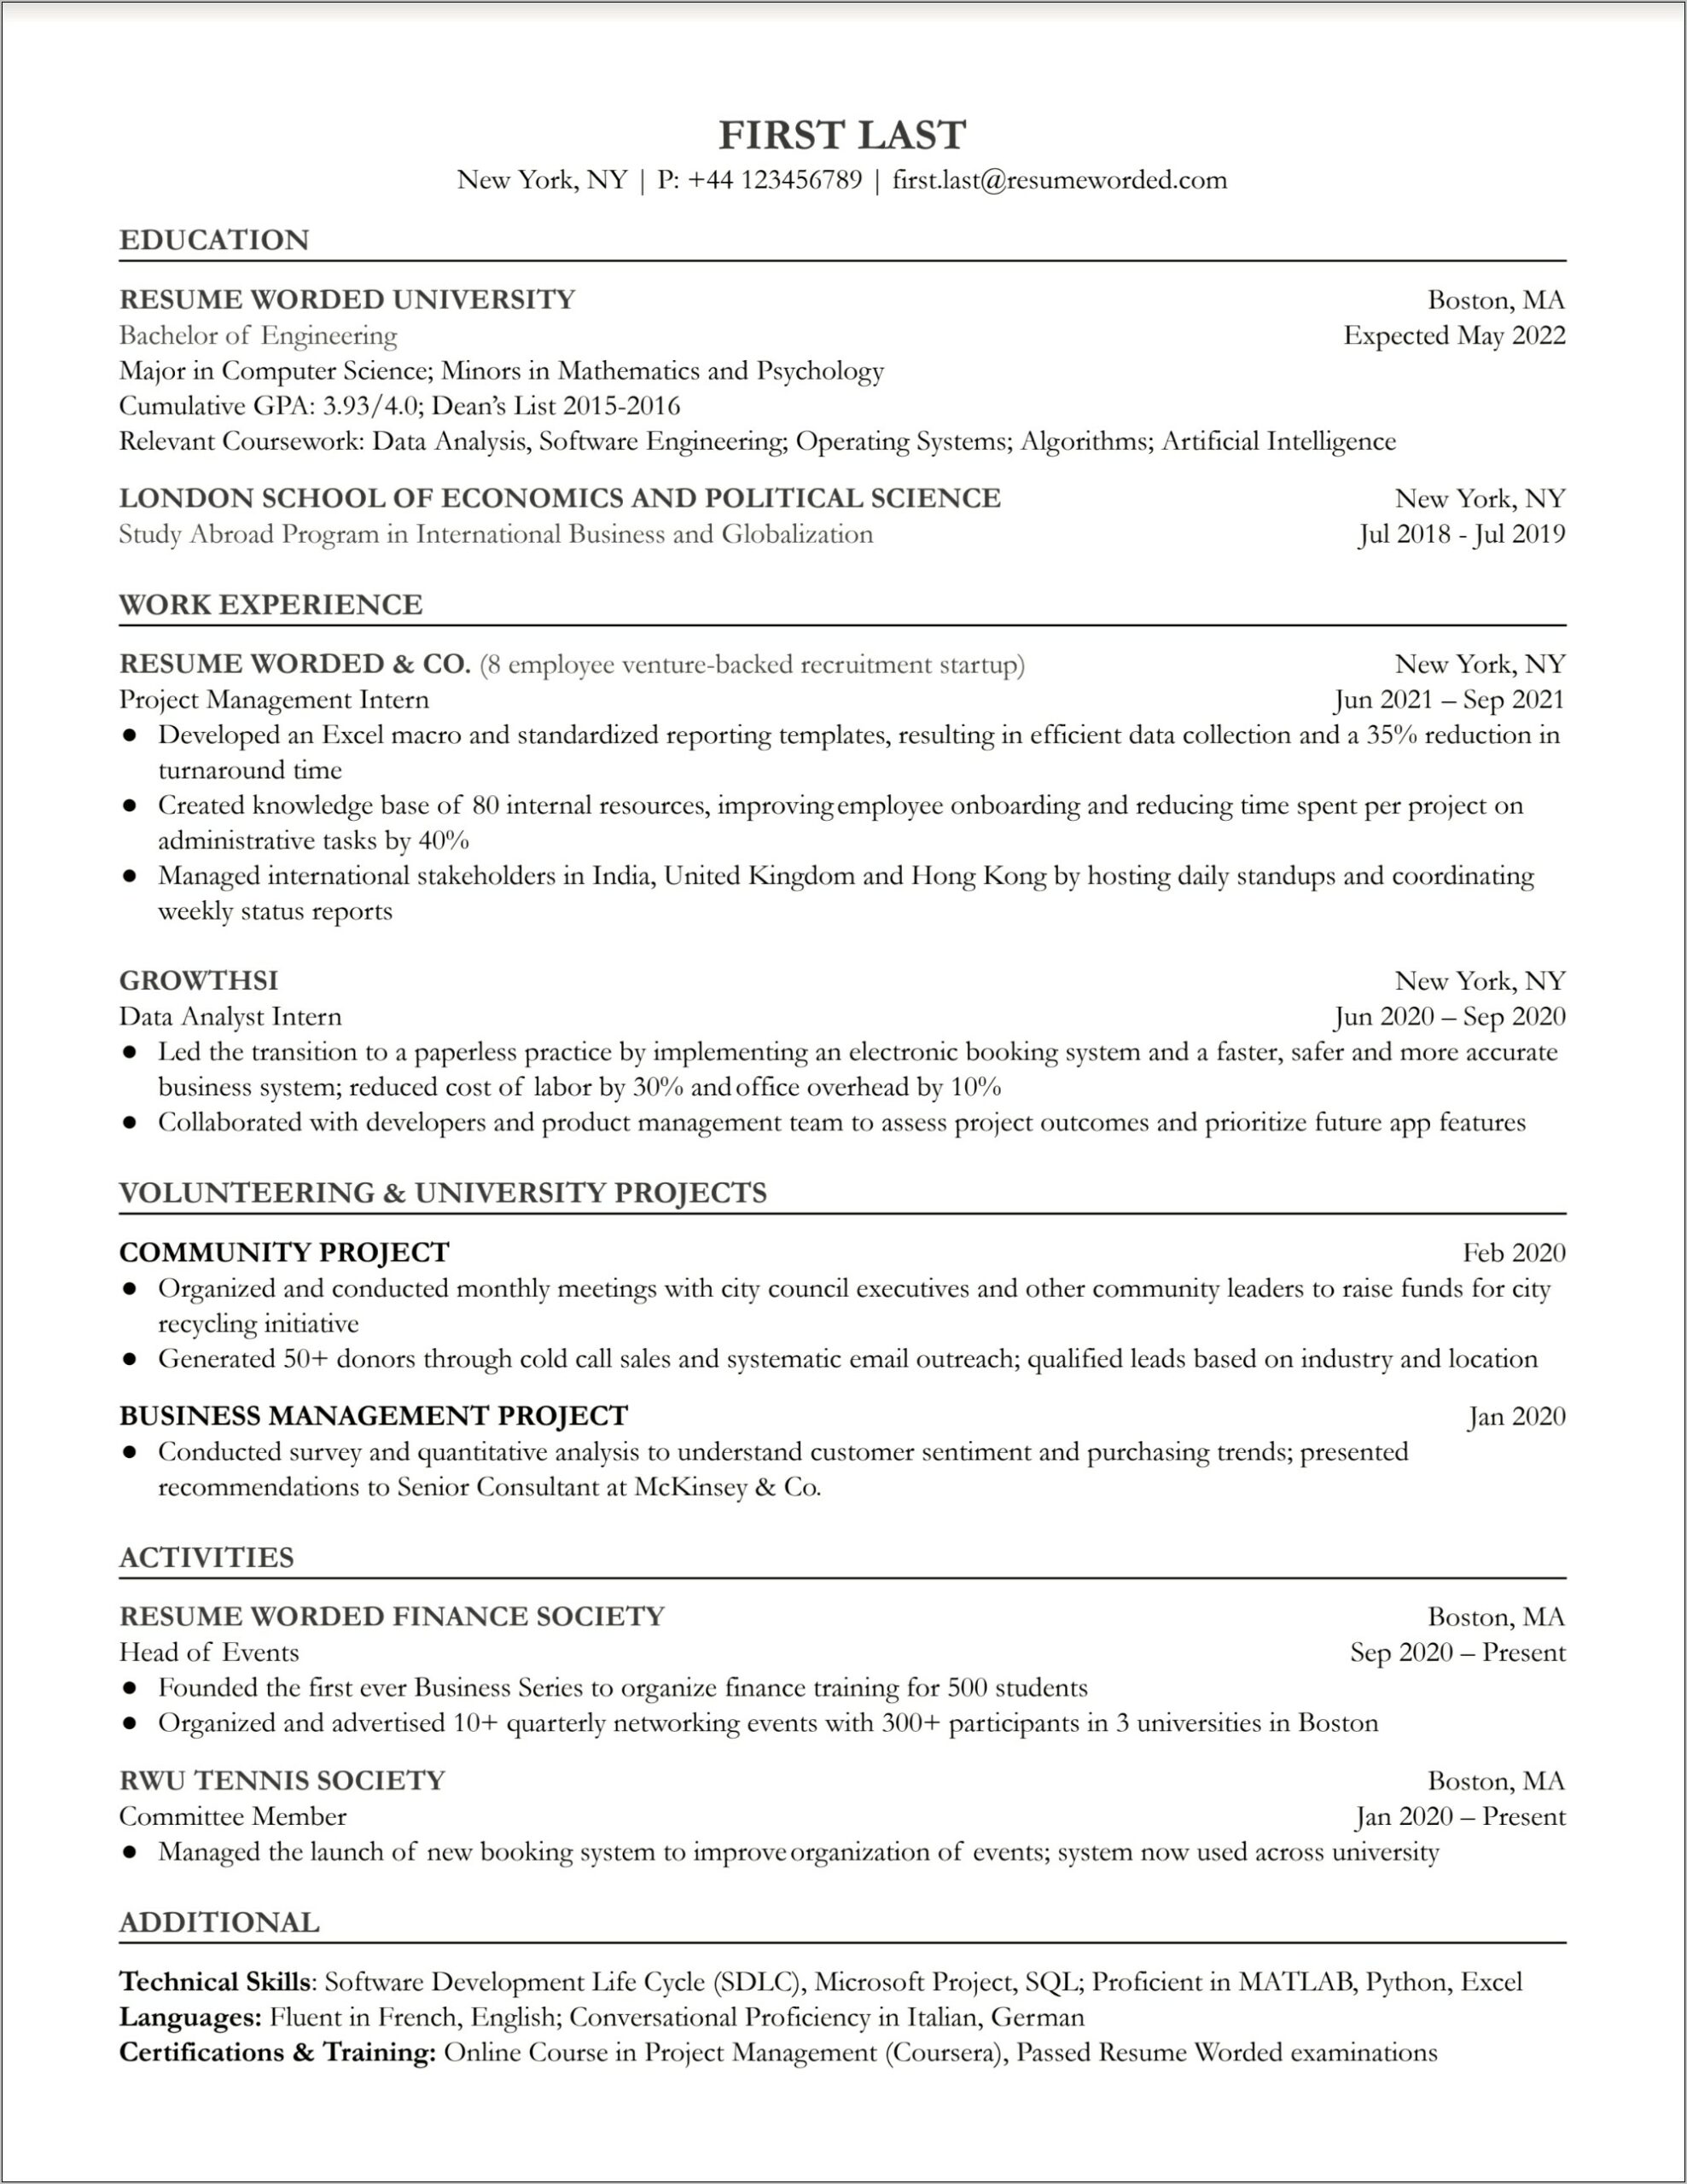 Positioning Resume For Project Manager